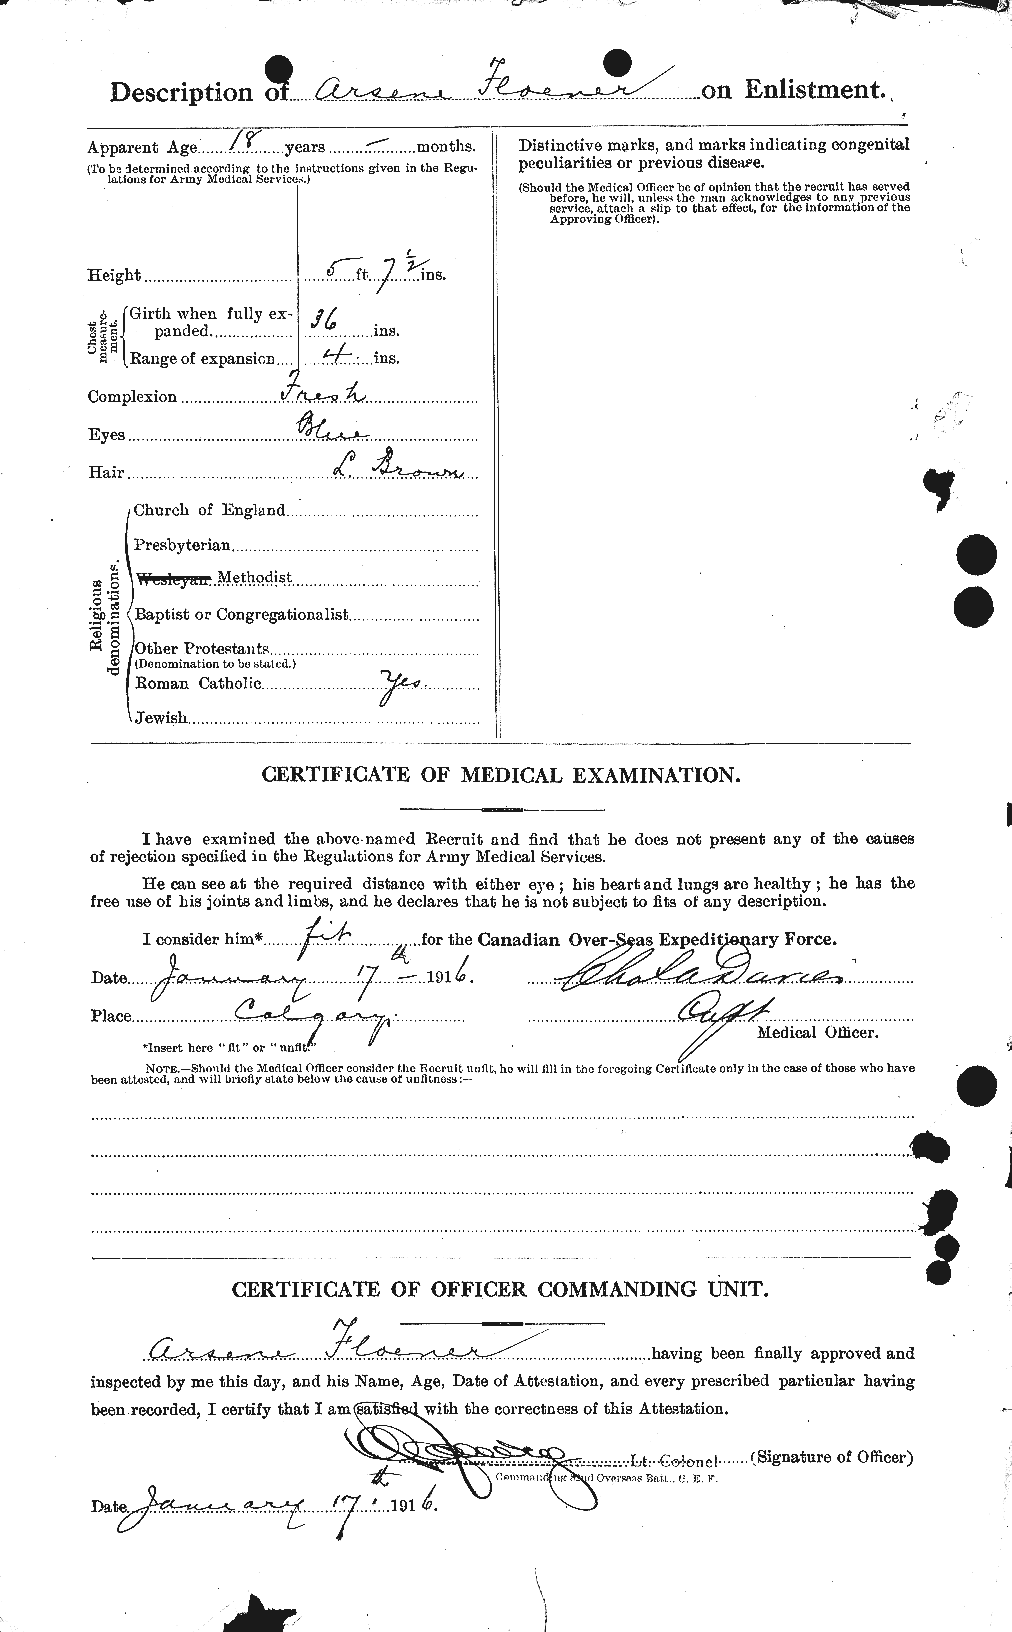 Personnel Records of the First World War - CEF 324536b